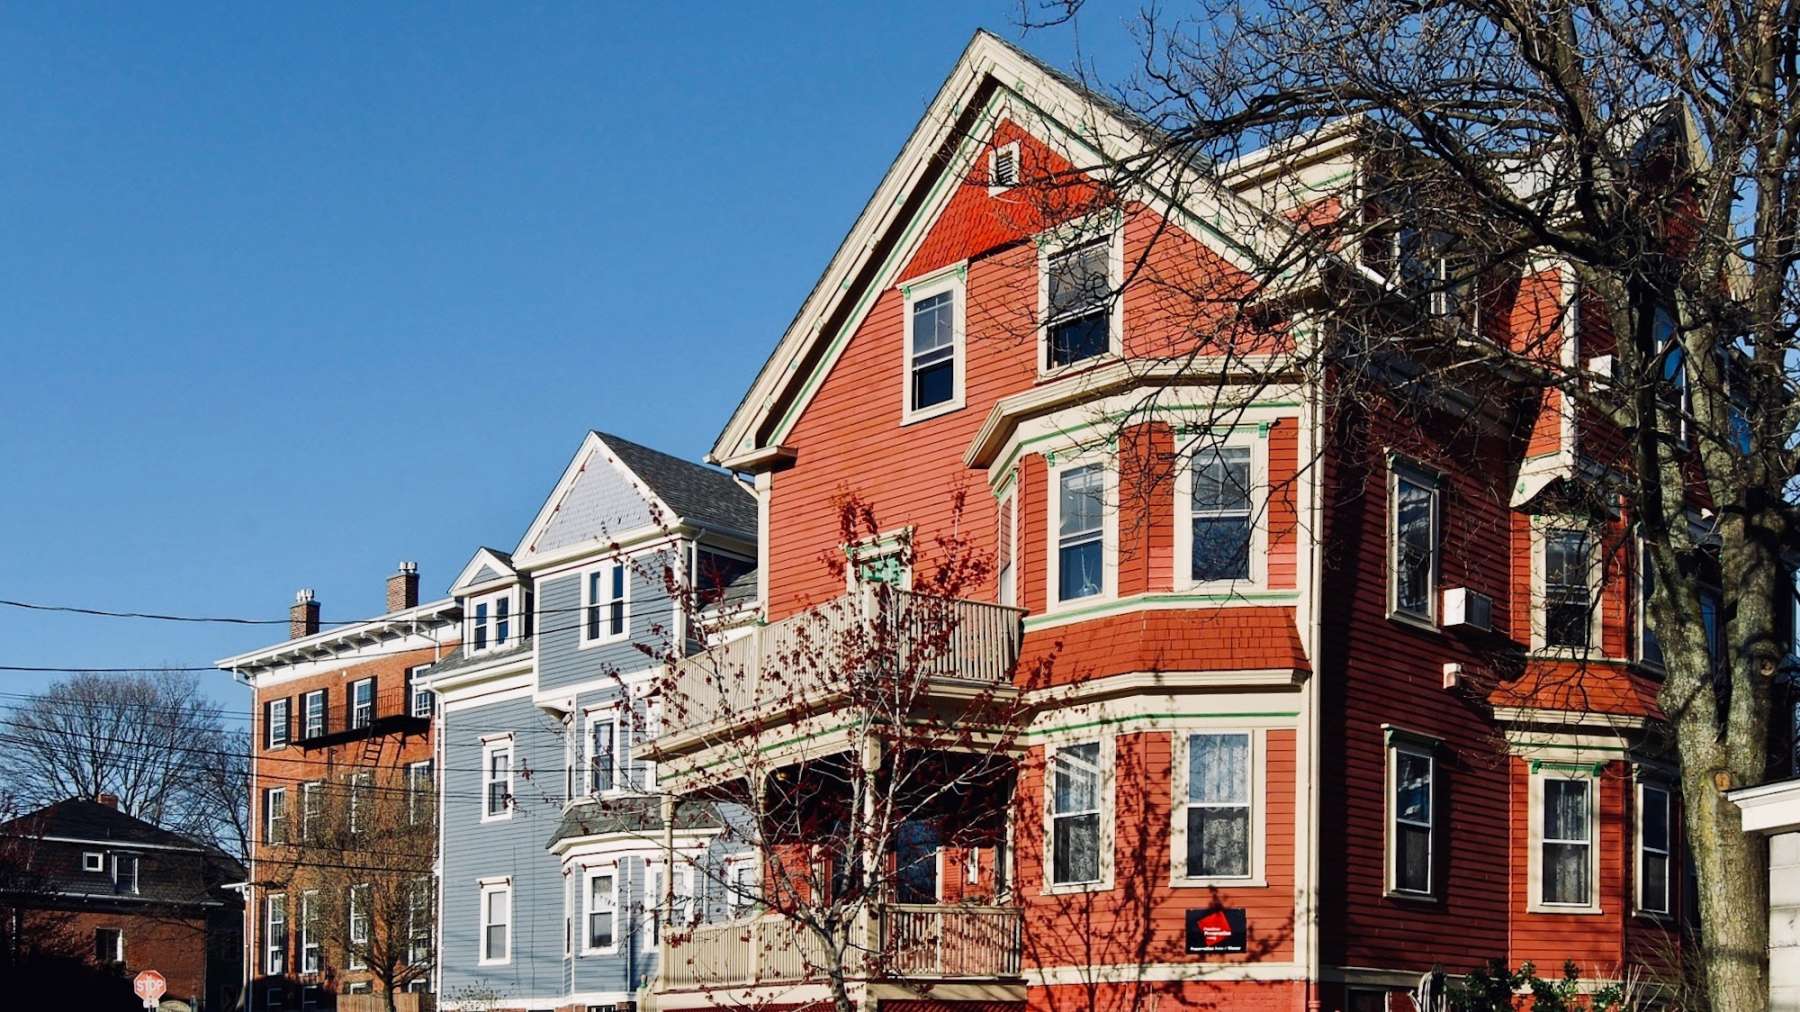 HousingWorks RI issues report on the benefits of housing bonds